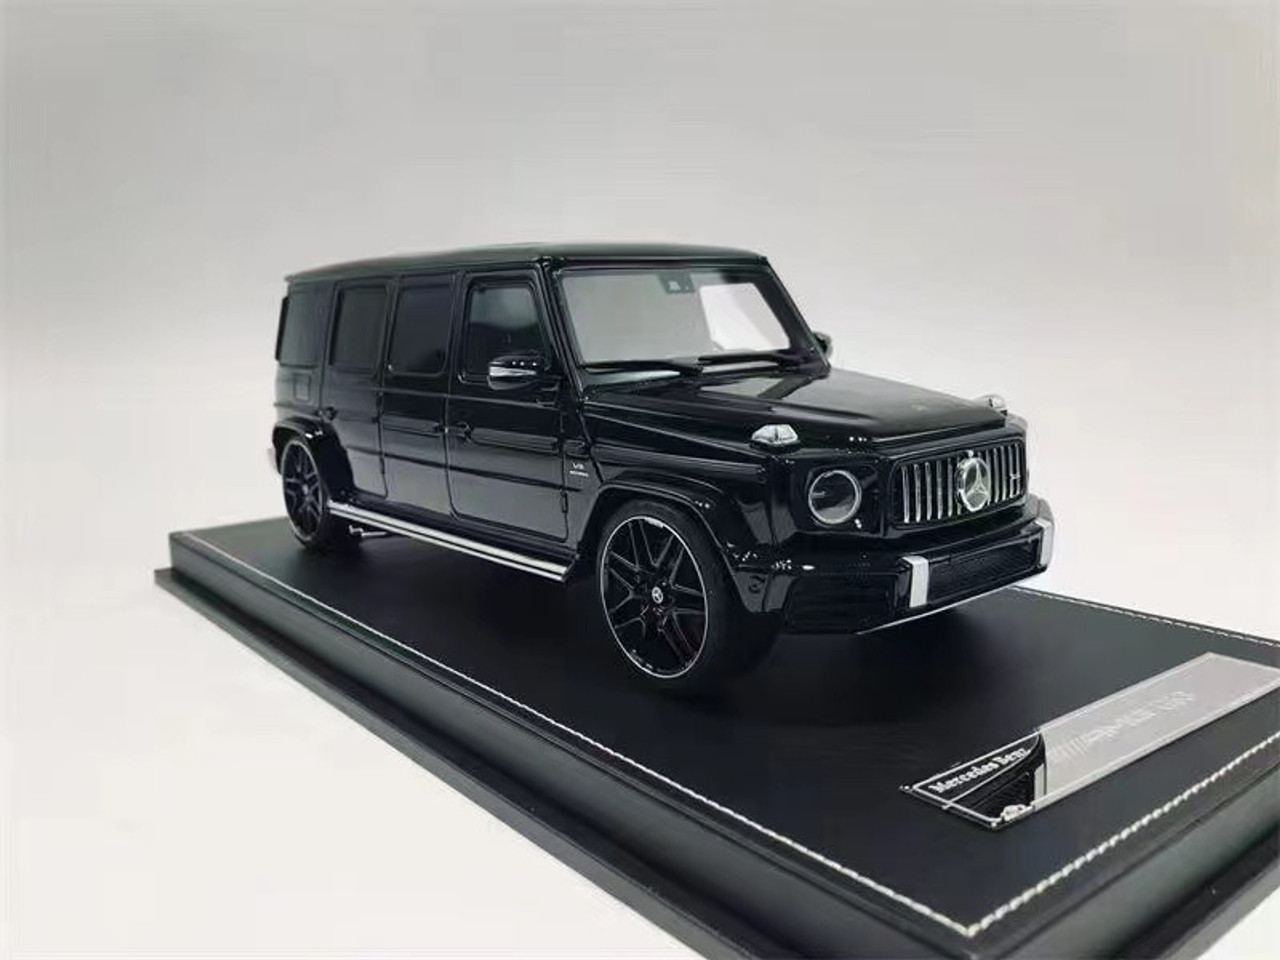 1/18 VIP Scale Model Mercedes-Benz G-Class G63 AMG Extended Limo